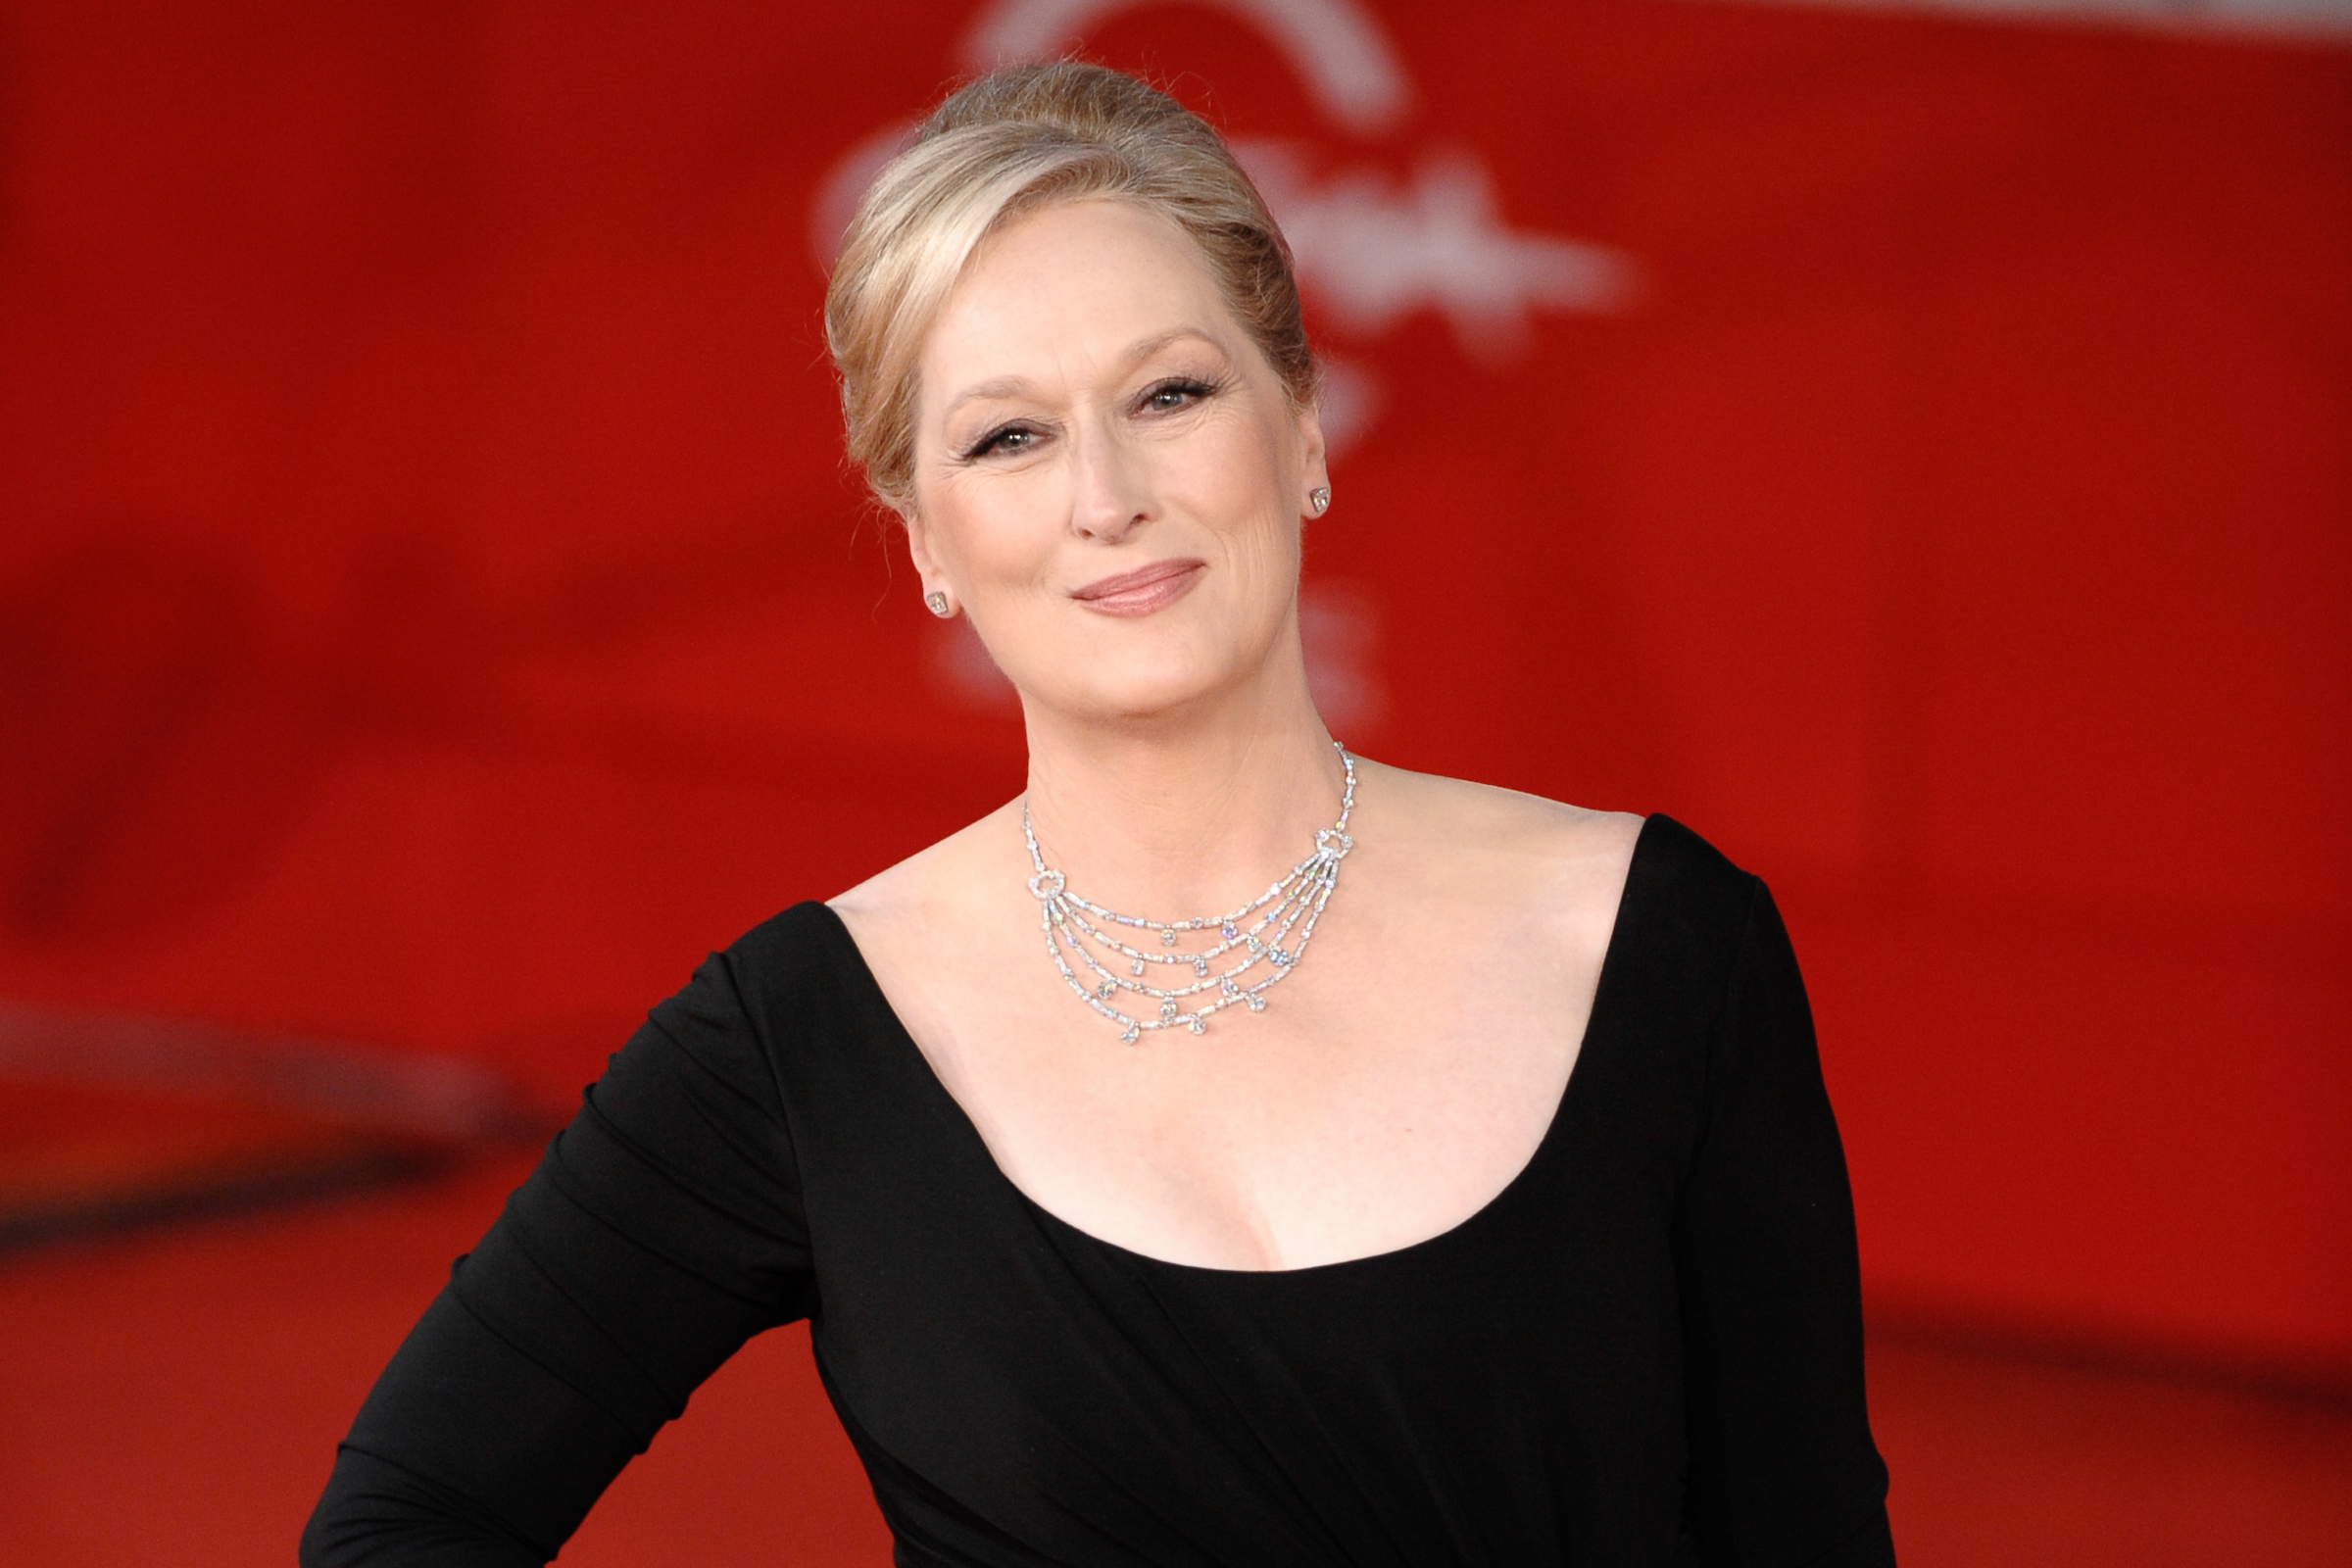 Meryl Streep Wallpaper Image Photos Pictures Background